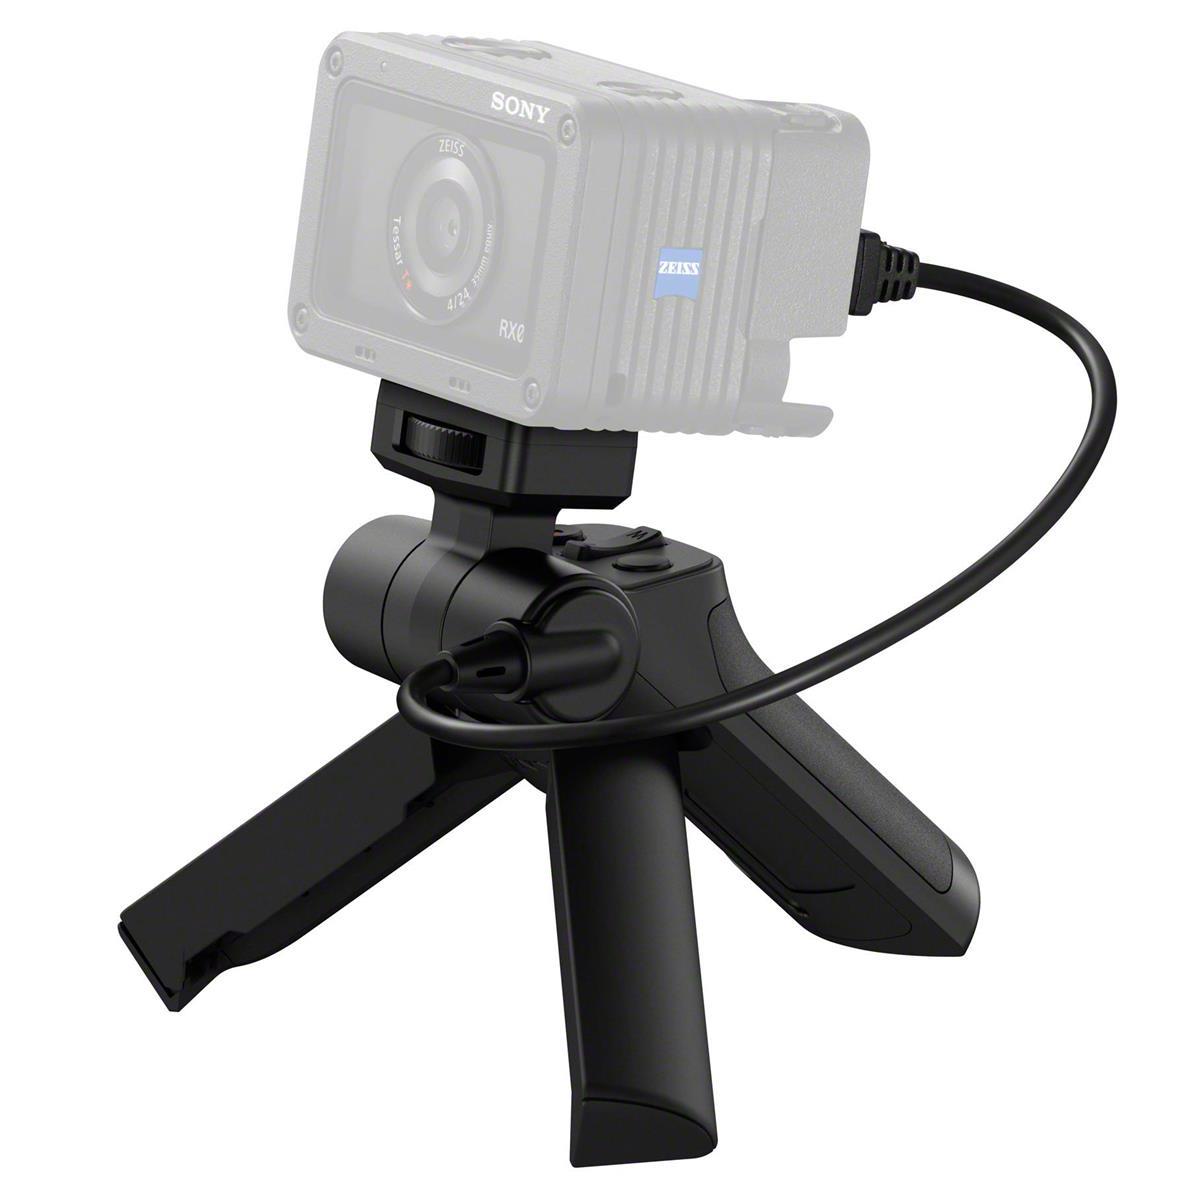 

Sony VCT-SGR1 Shooting Grip and Tripod for Compact Cameras